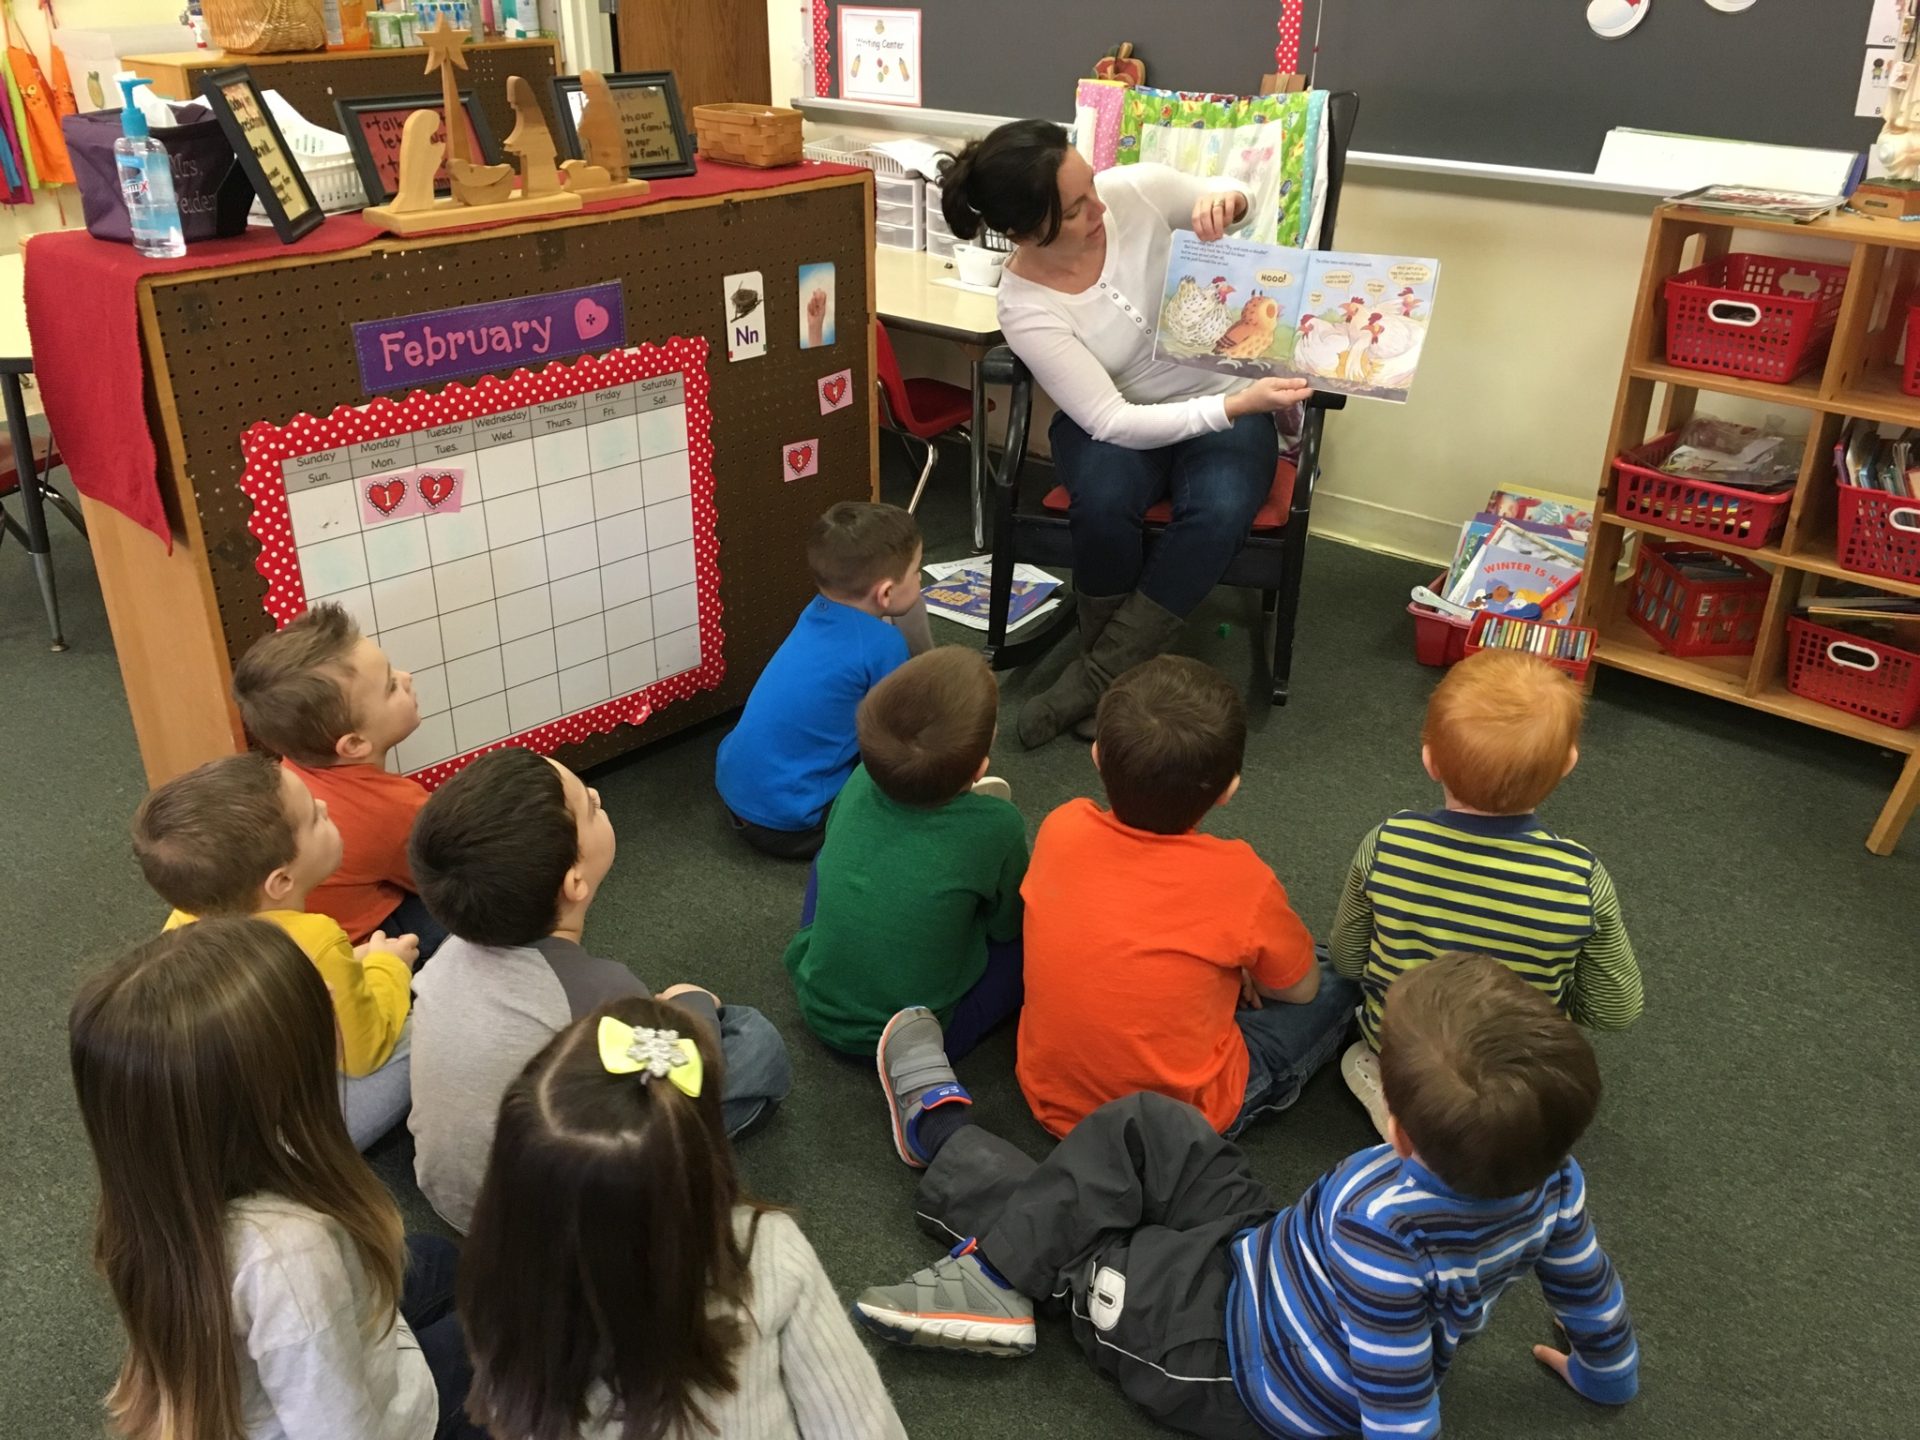 A parent reading to kids in a classroom